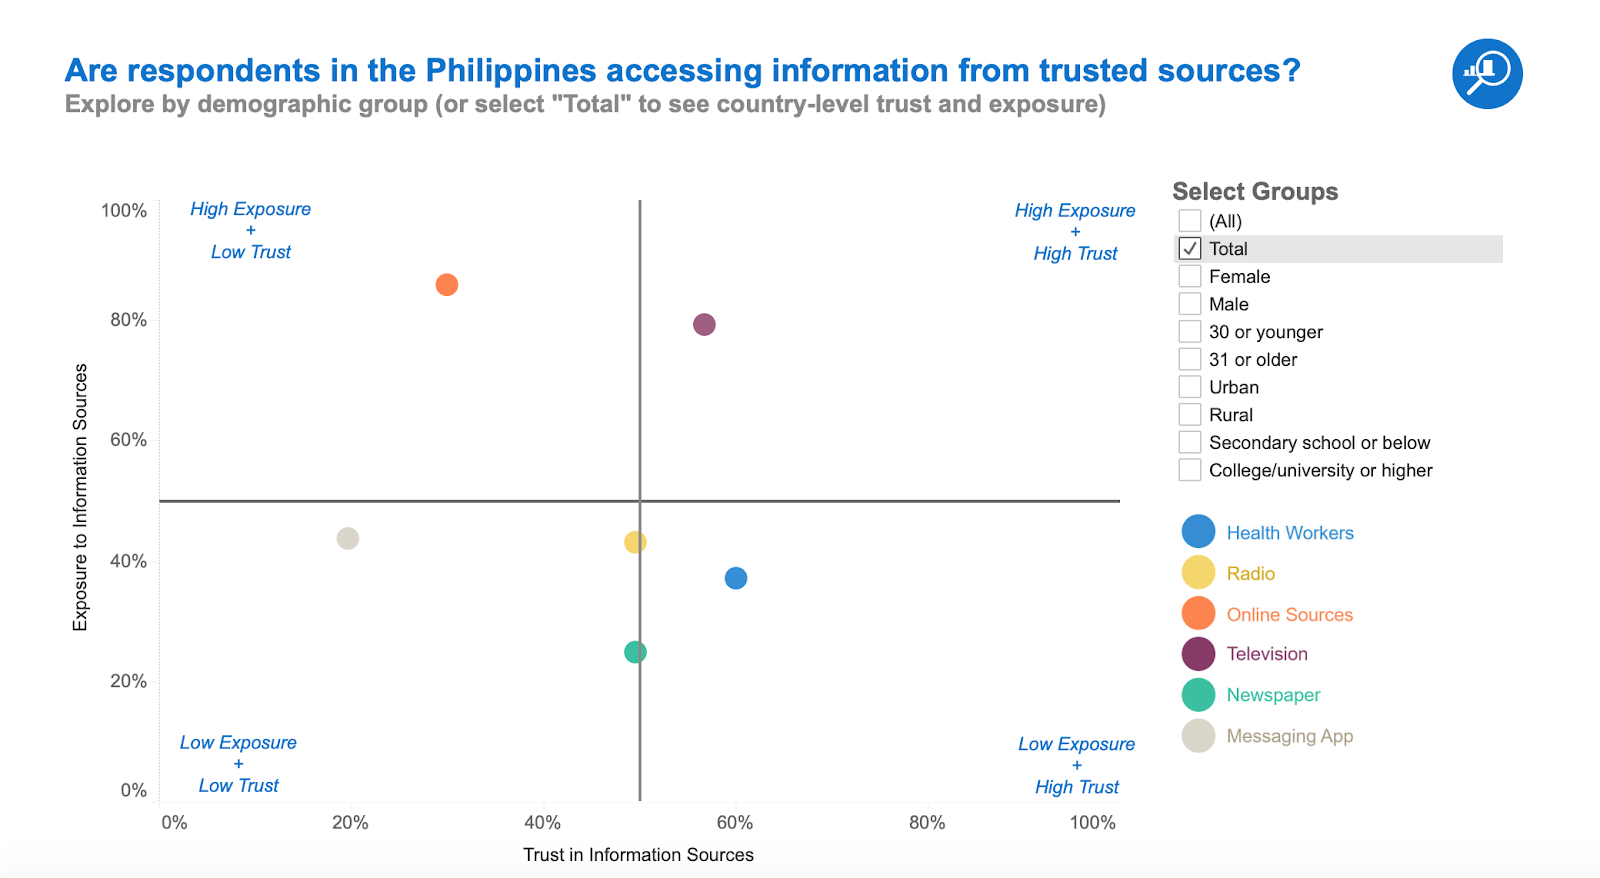 Are respondents in the Philippines accessing information from trusted sources?